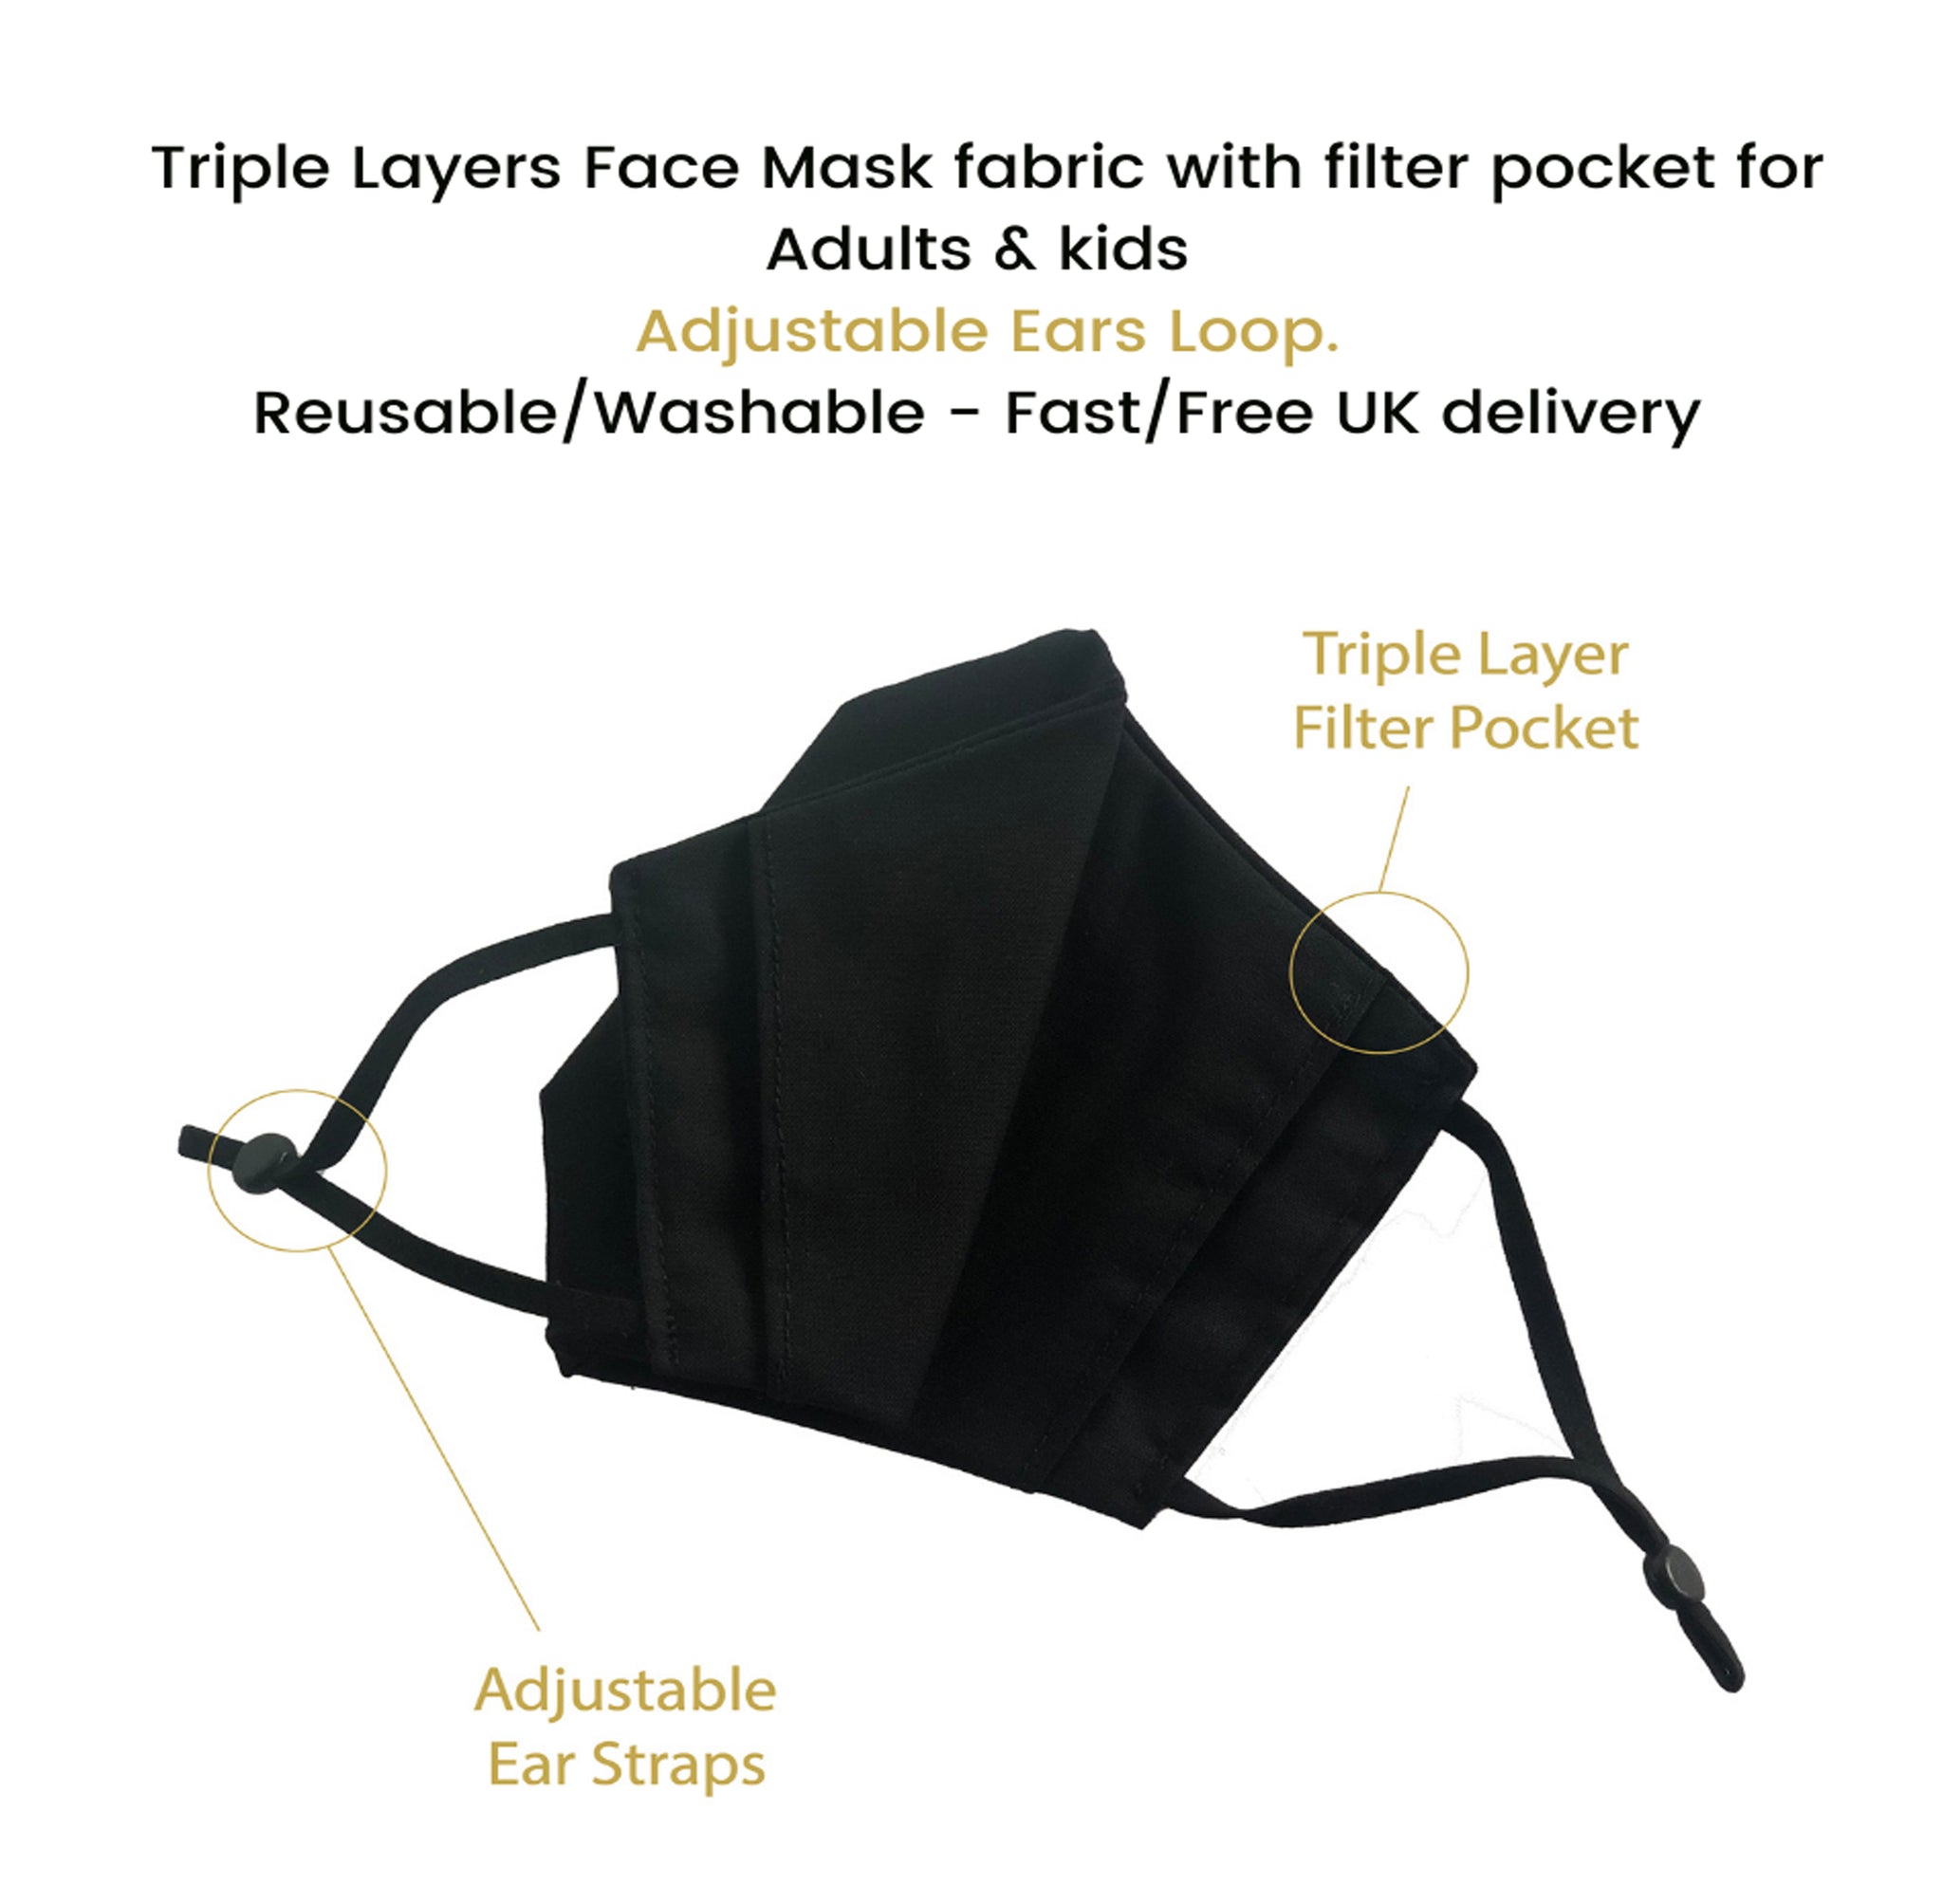 Black Face Mask 3 layers fabric